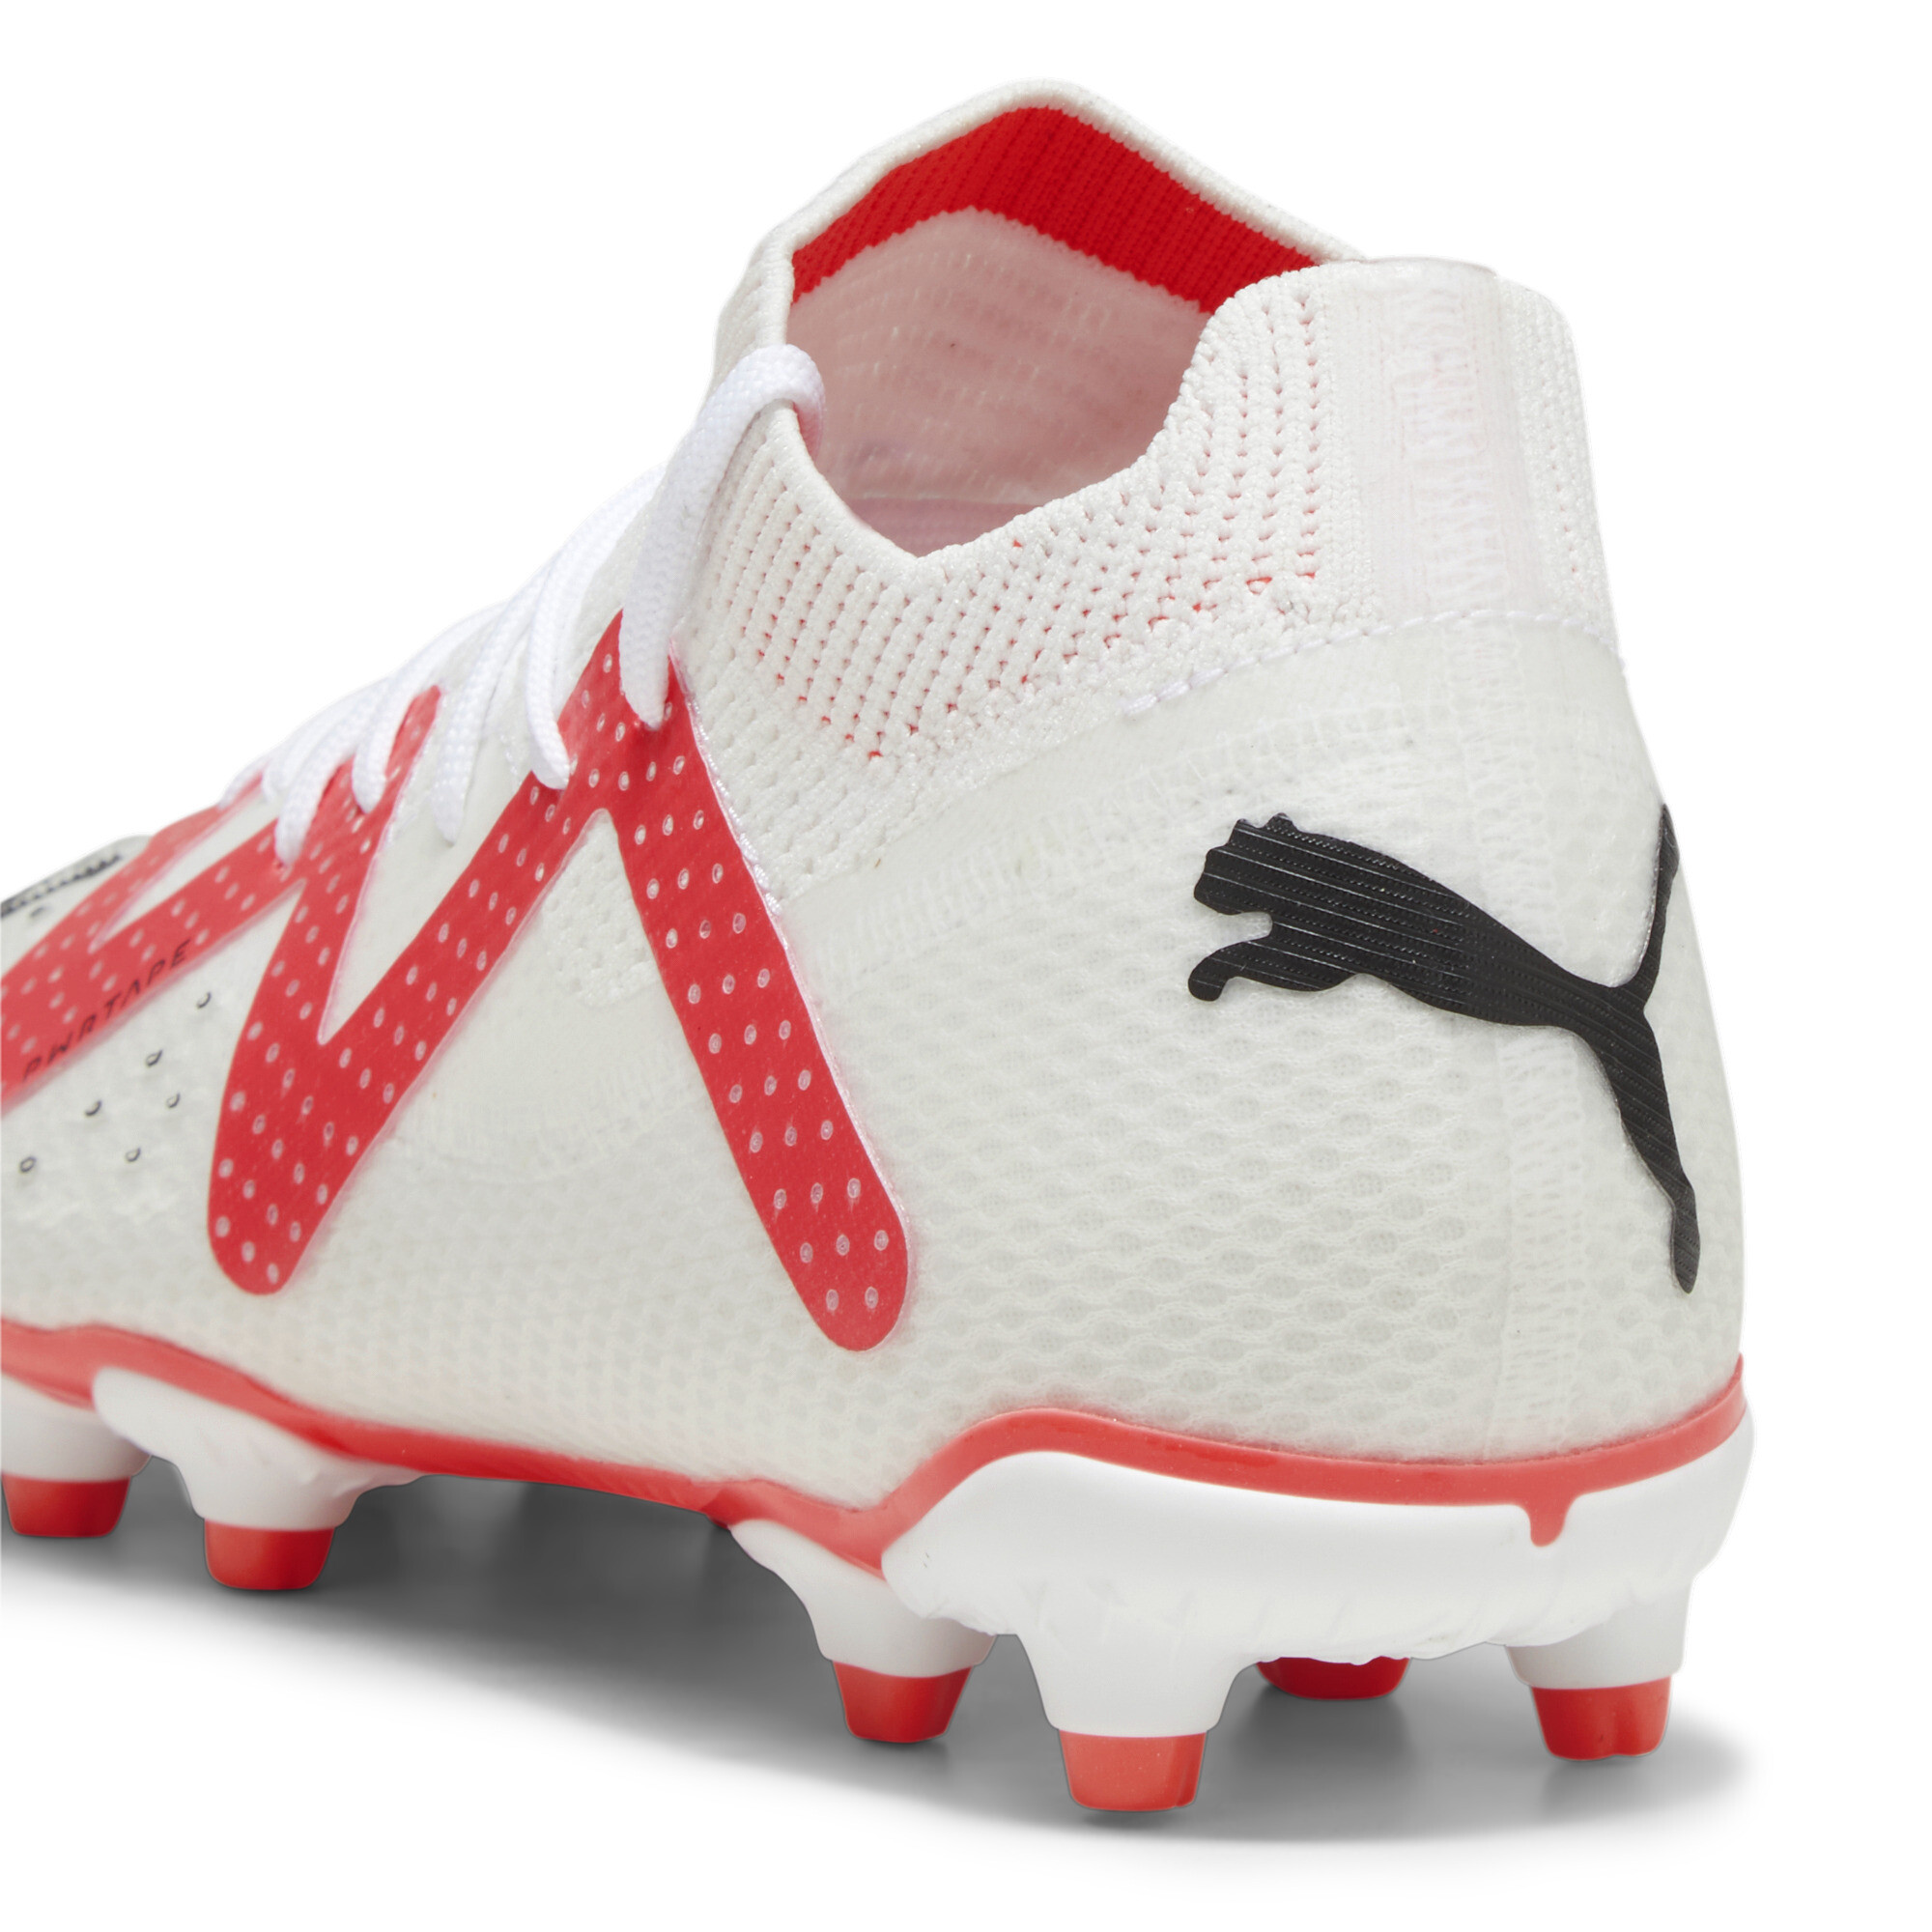 Puma FUTURE PRO FG/AG Youth Football Boots, White, Size 34, Shoes